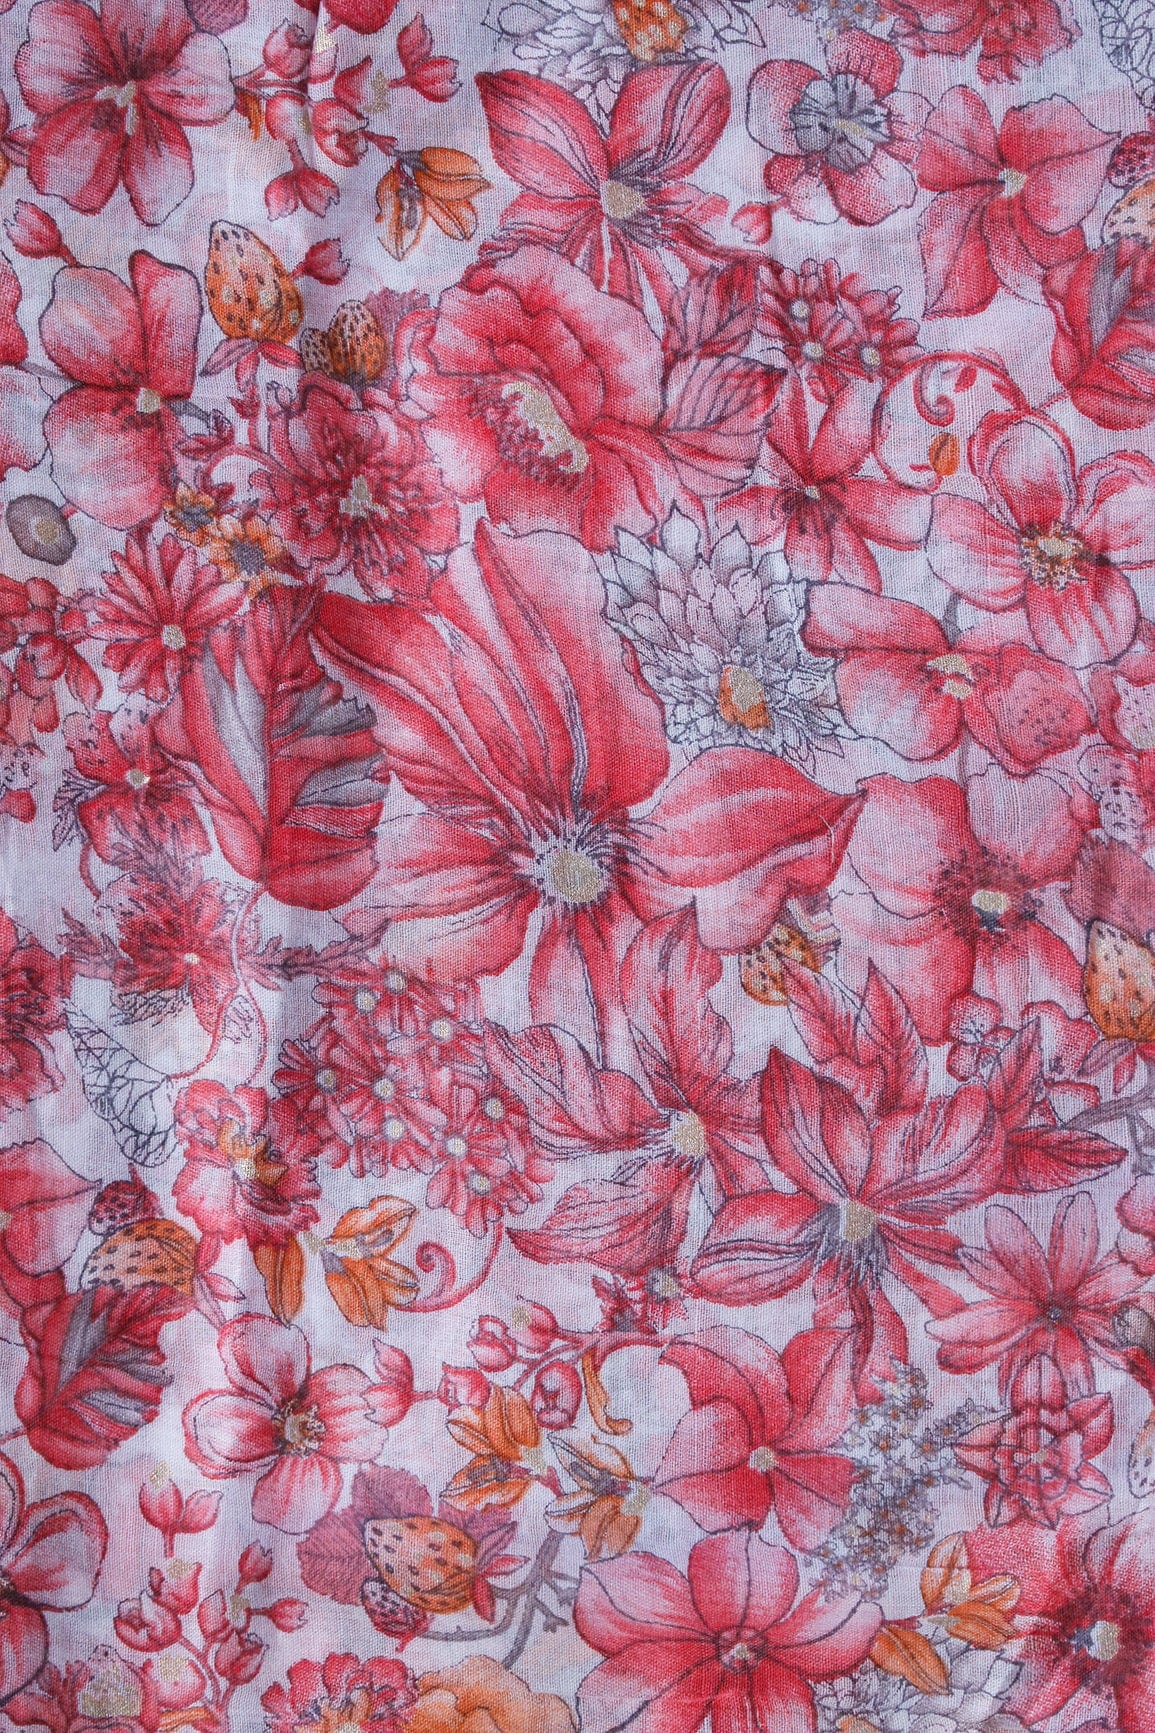 doeraa Prints Light Pink And White Floral With Foil Print On Pure Mul Cotton Fabric